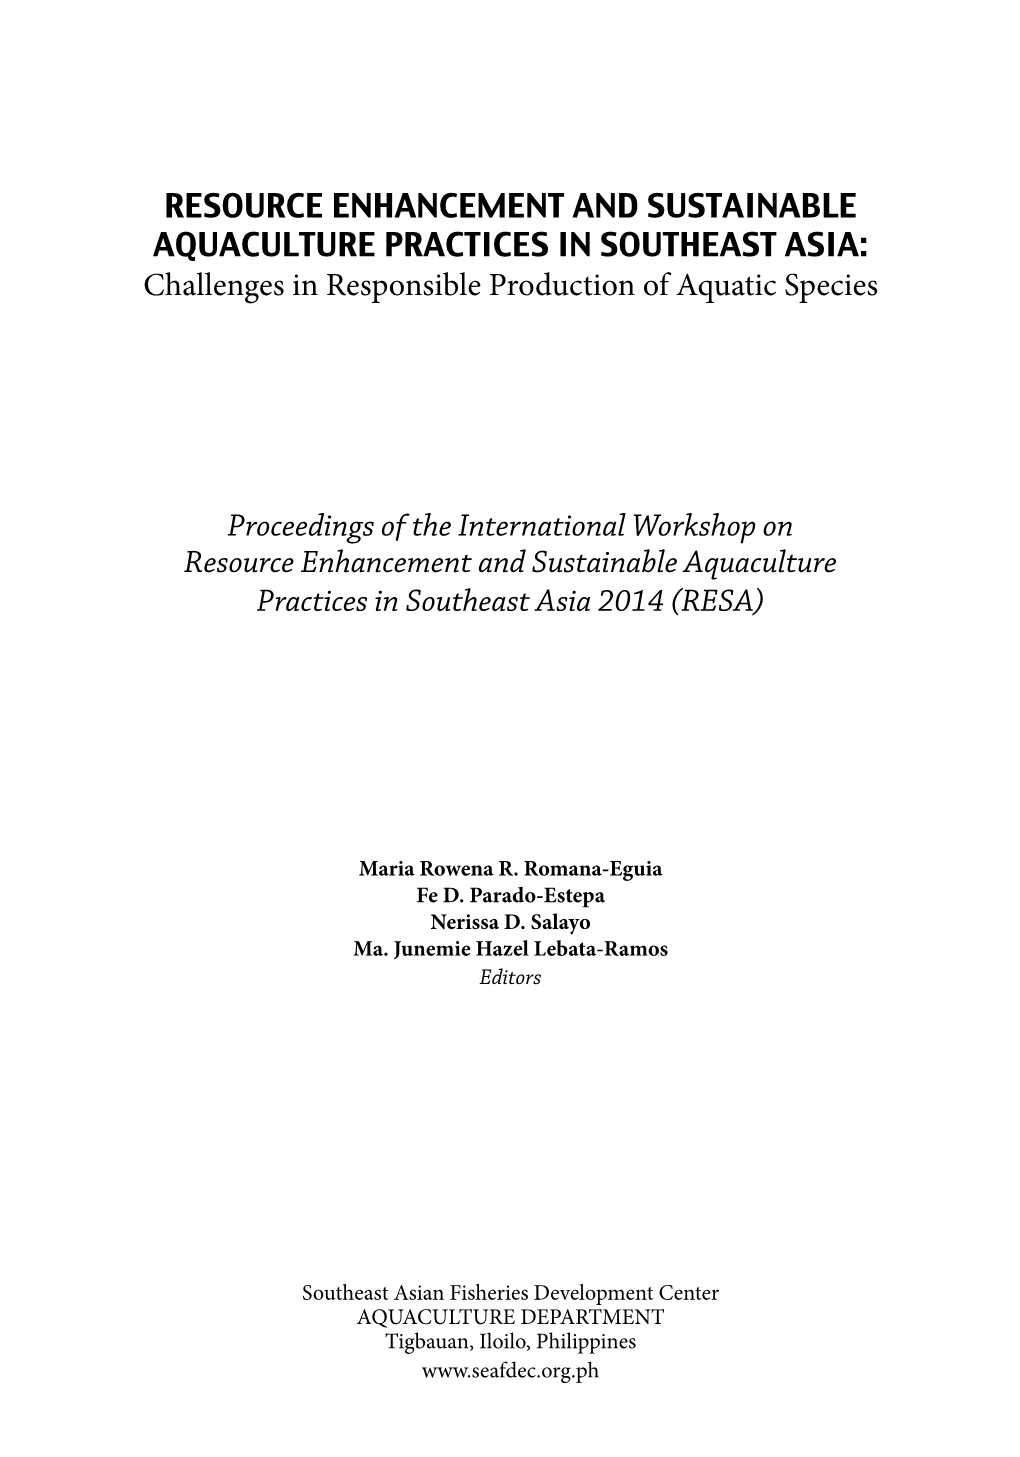 Resource Enhancement and Sustainable Aquaculture Practices in Southeast Asia 2014 (RESA)